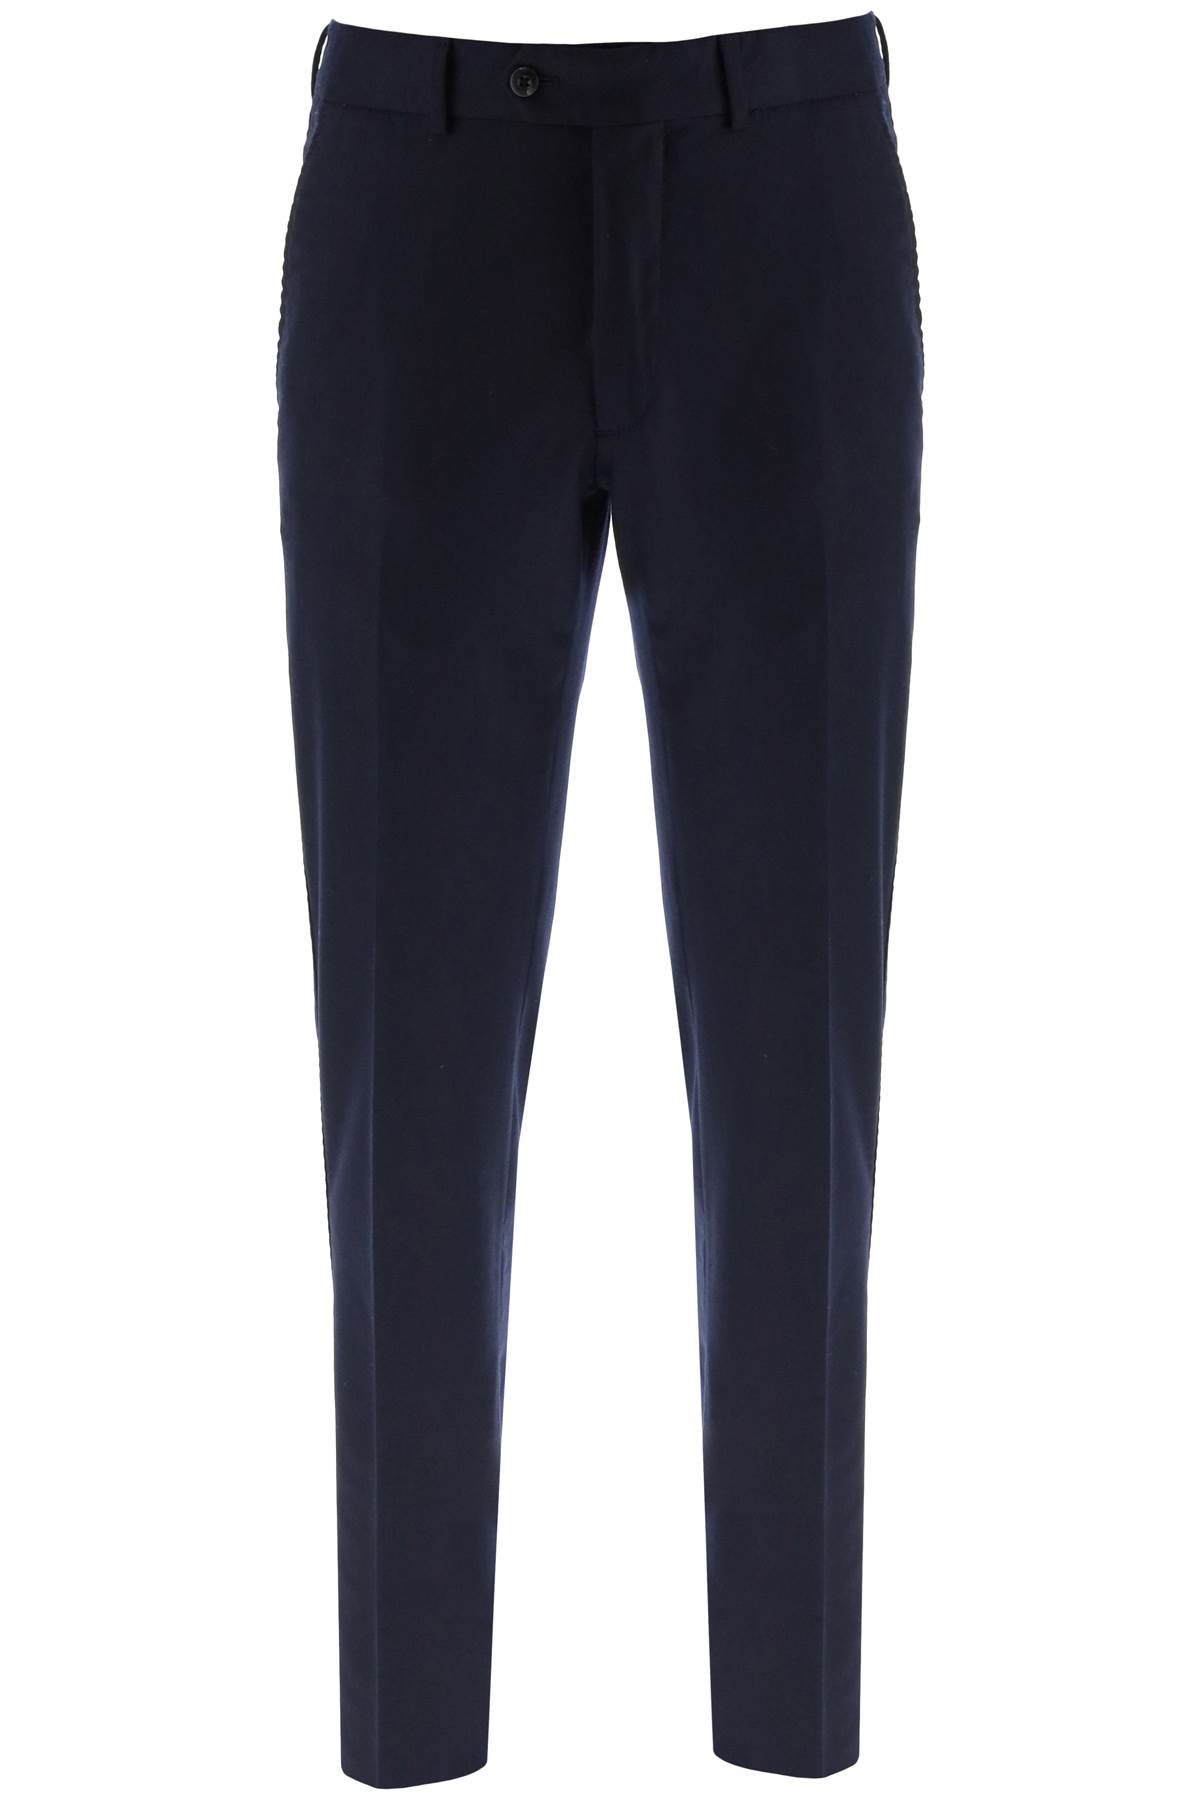 caruso superfine wool trousers